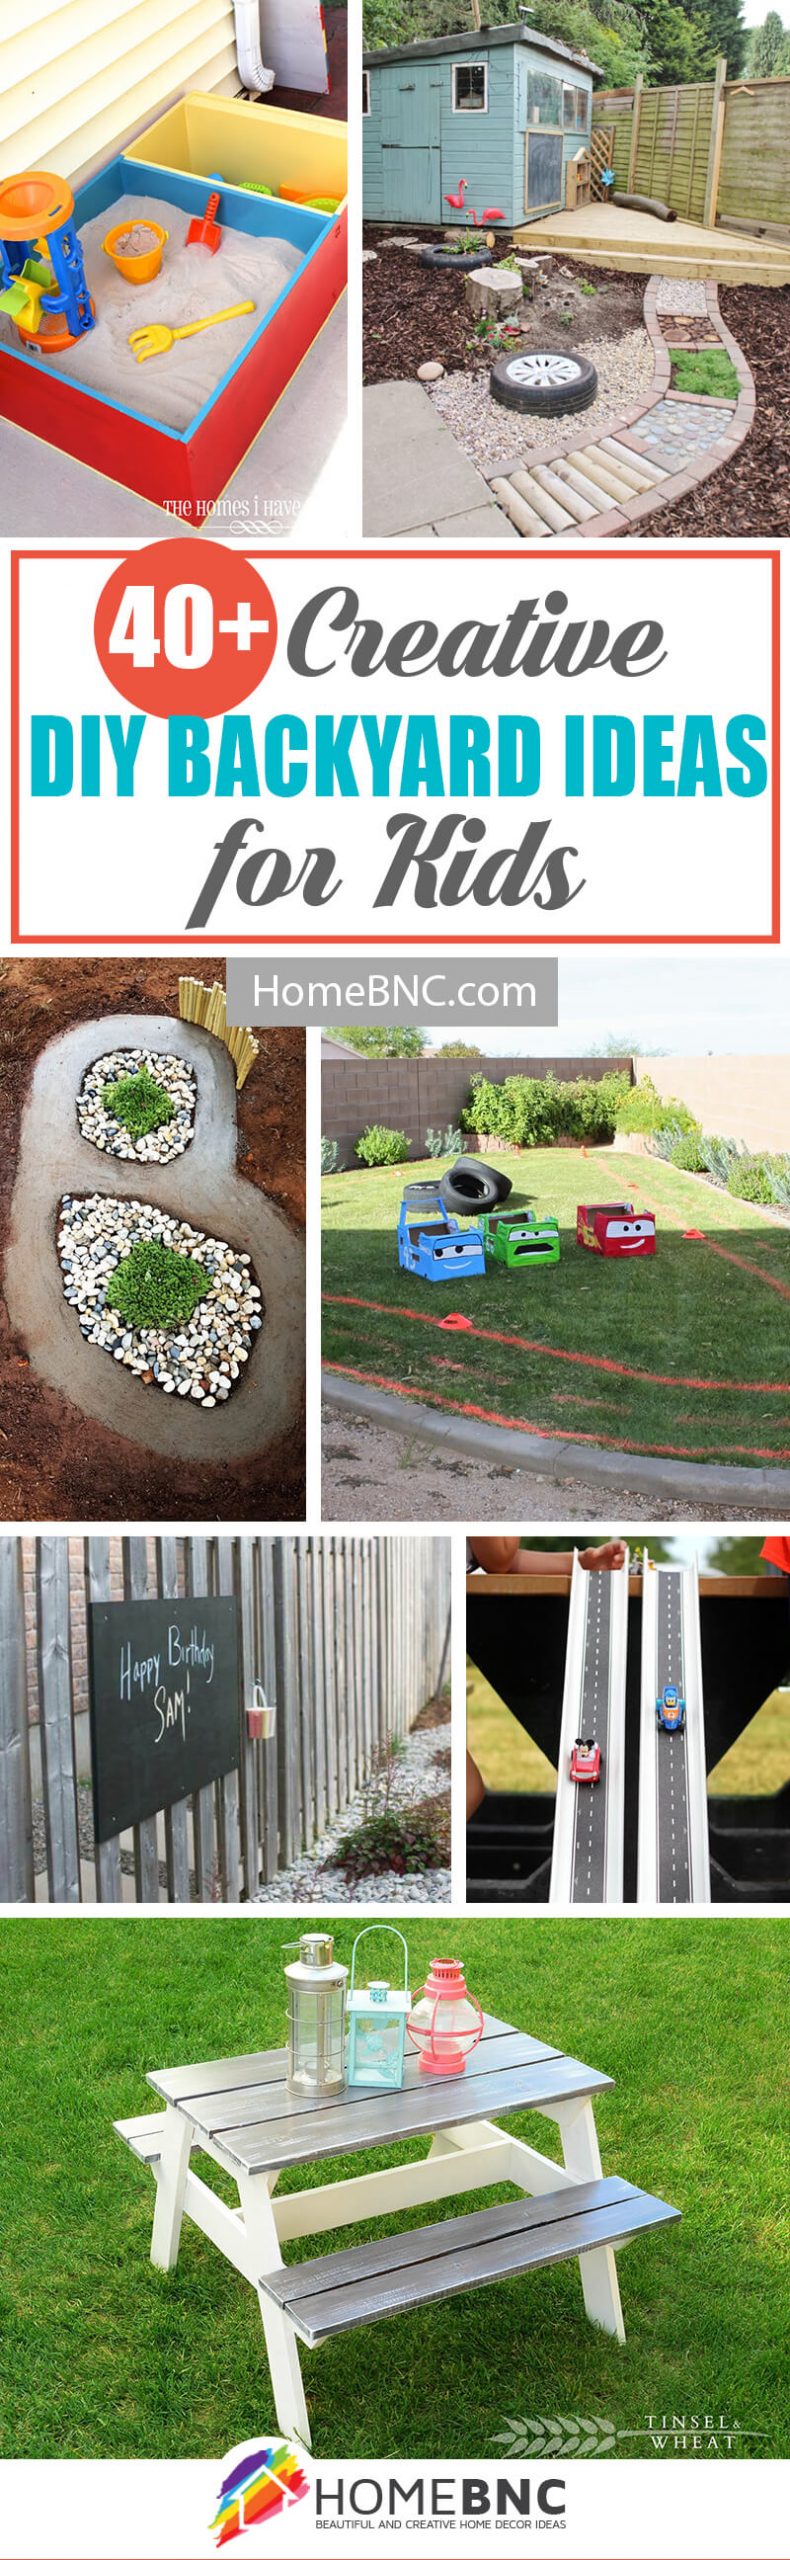 DIY Backyard Projects For Kids